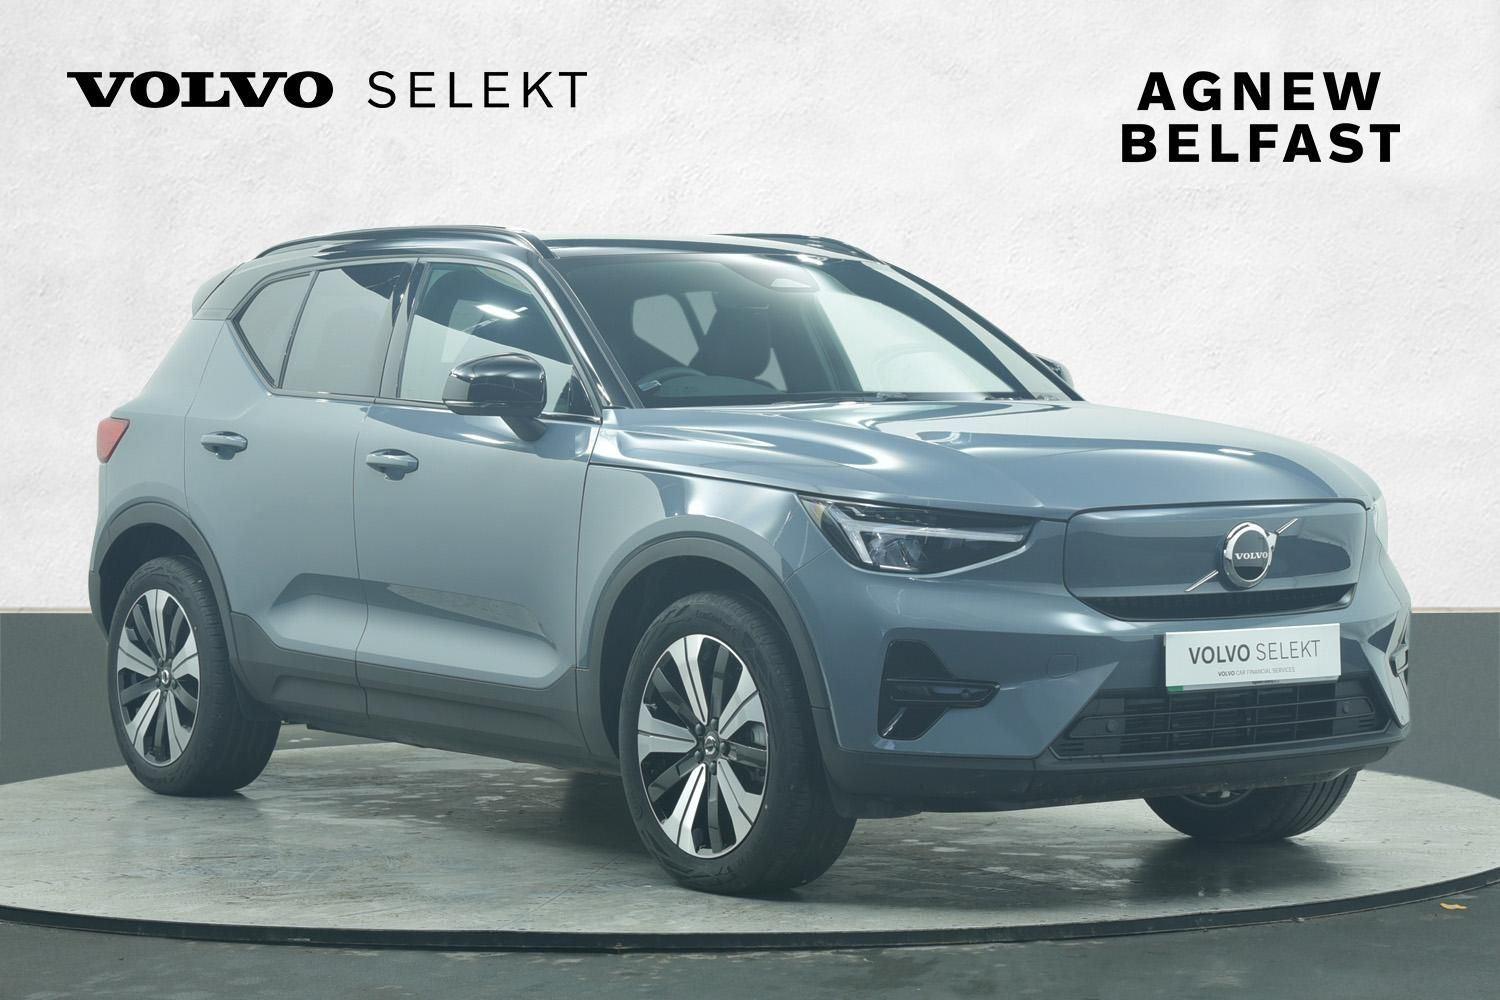 Used Volvo Selekt Volvo XC40 Recharge Core (in grey) available for purchase at Agnew Volvo Belfast